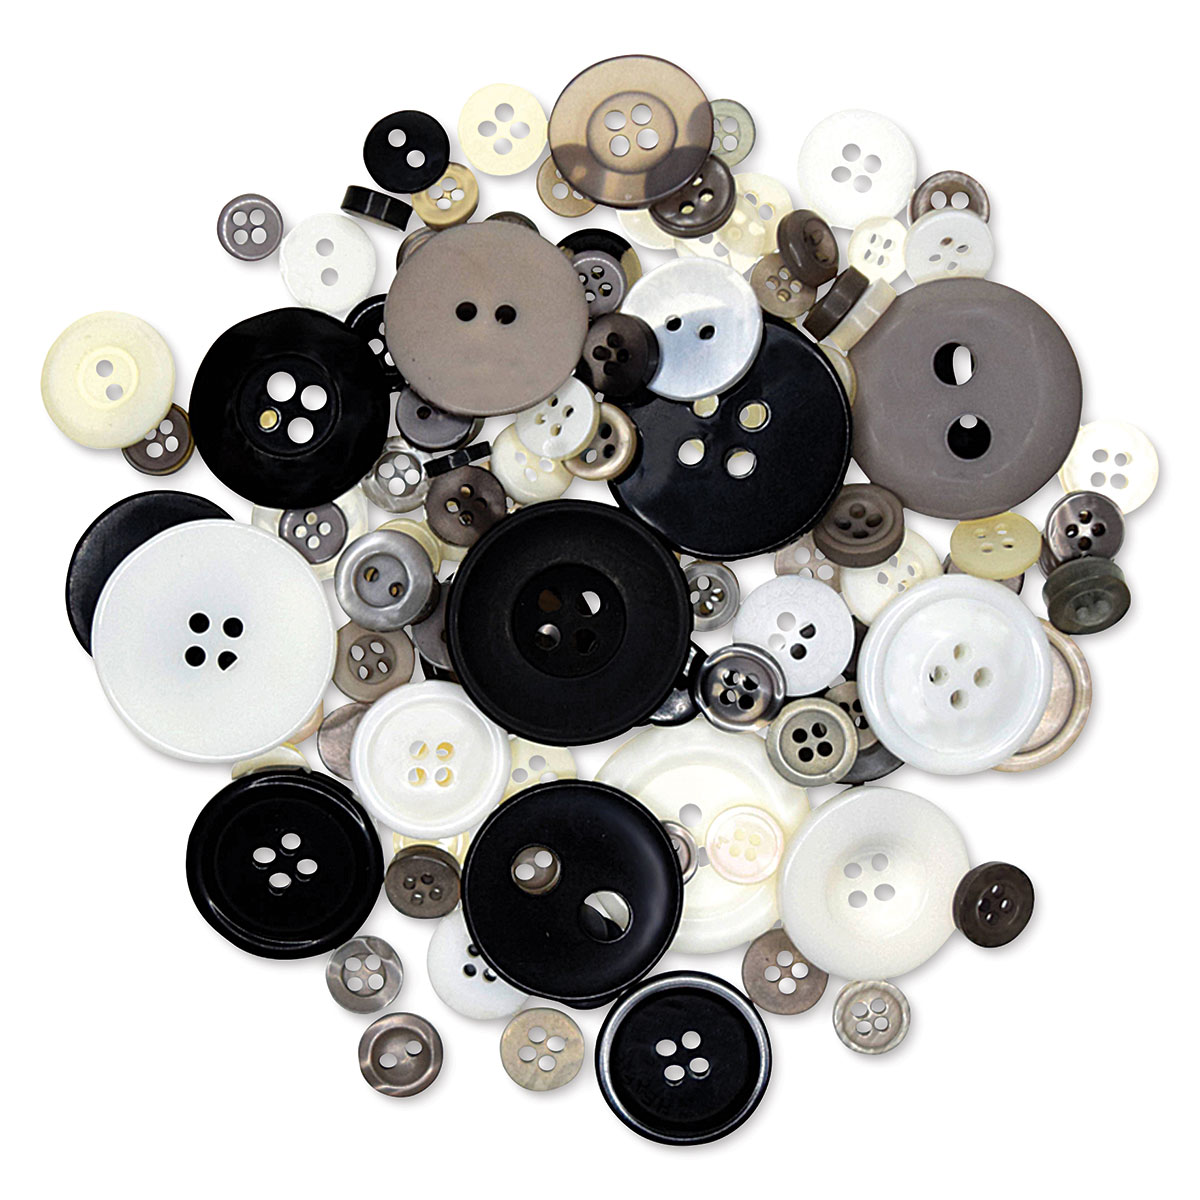 Fashion Dyed Buttons | BLICK Art Materials